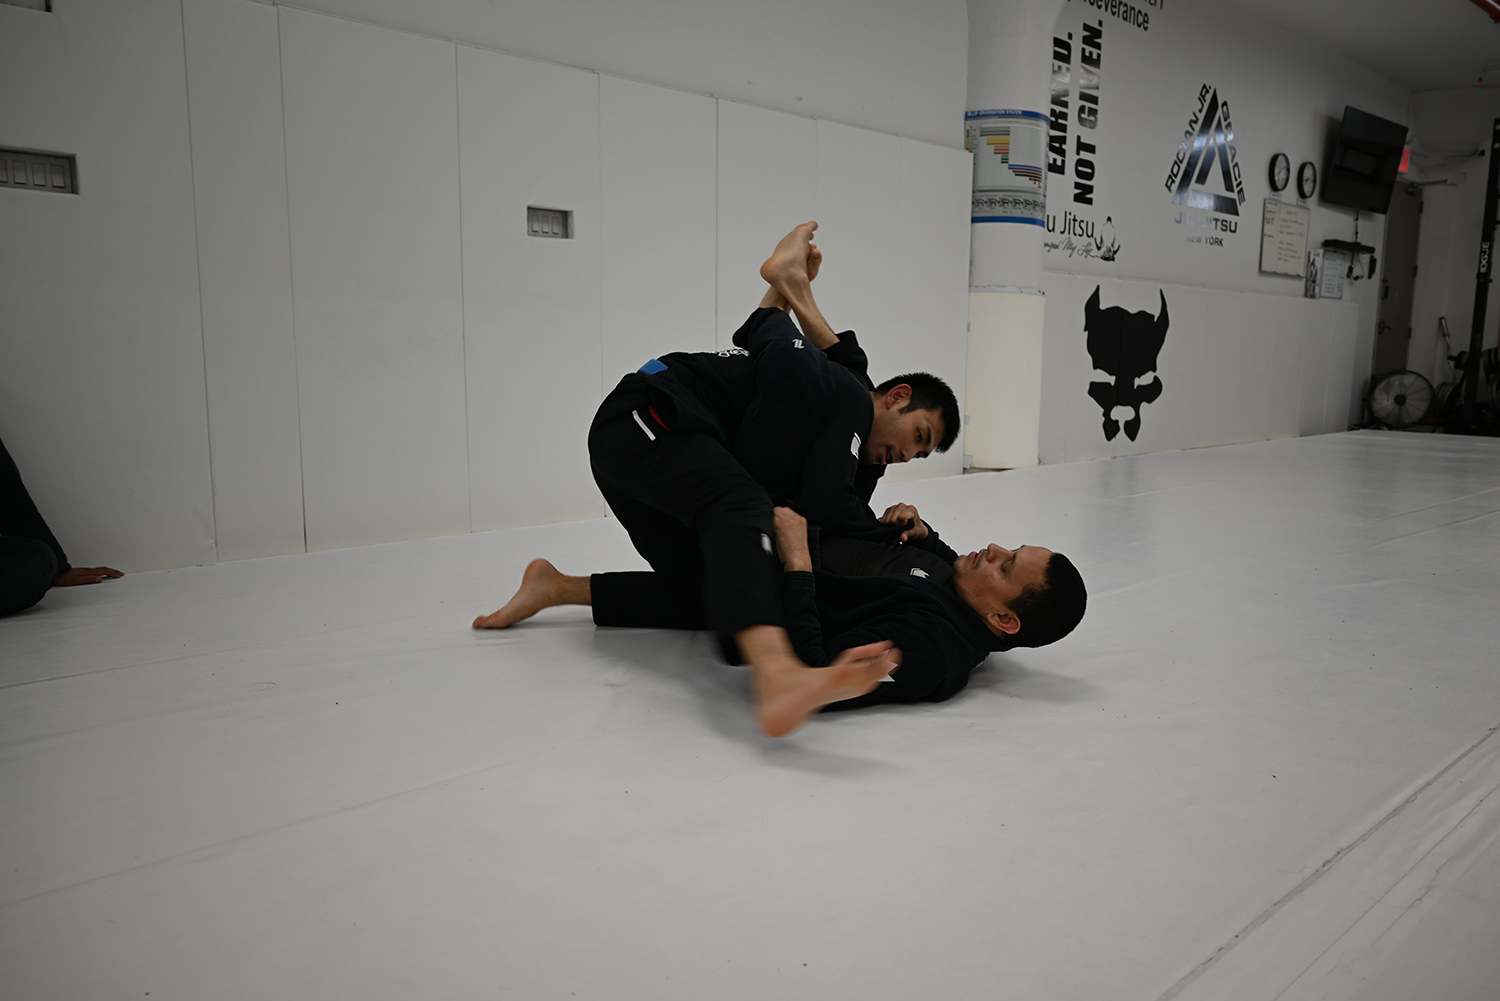 10 Vital Tips to Level Up Your BJJ Game in NYC